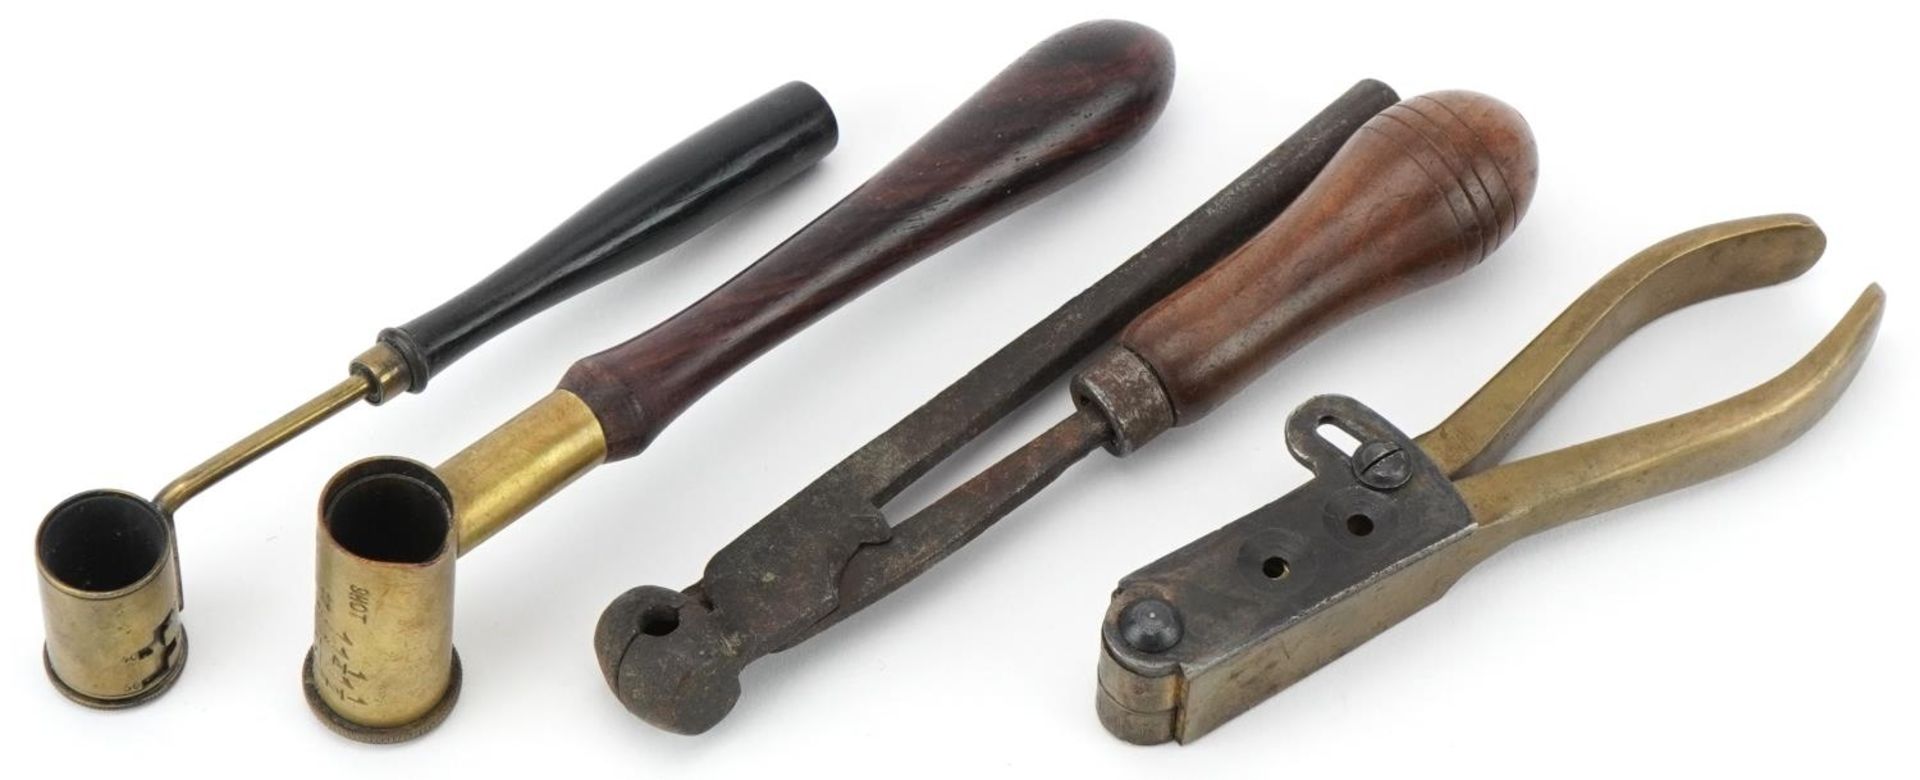 Two wooden and brass shotgun cartridge makers along with an wooden handled shot maker including an